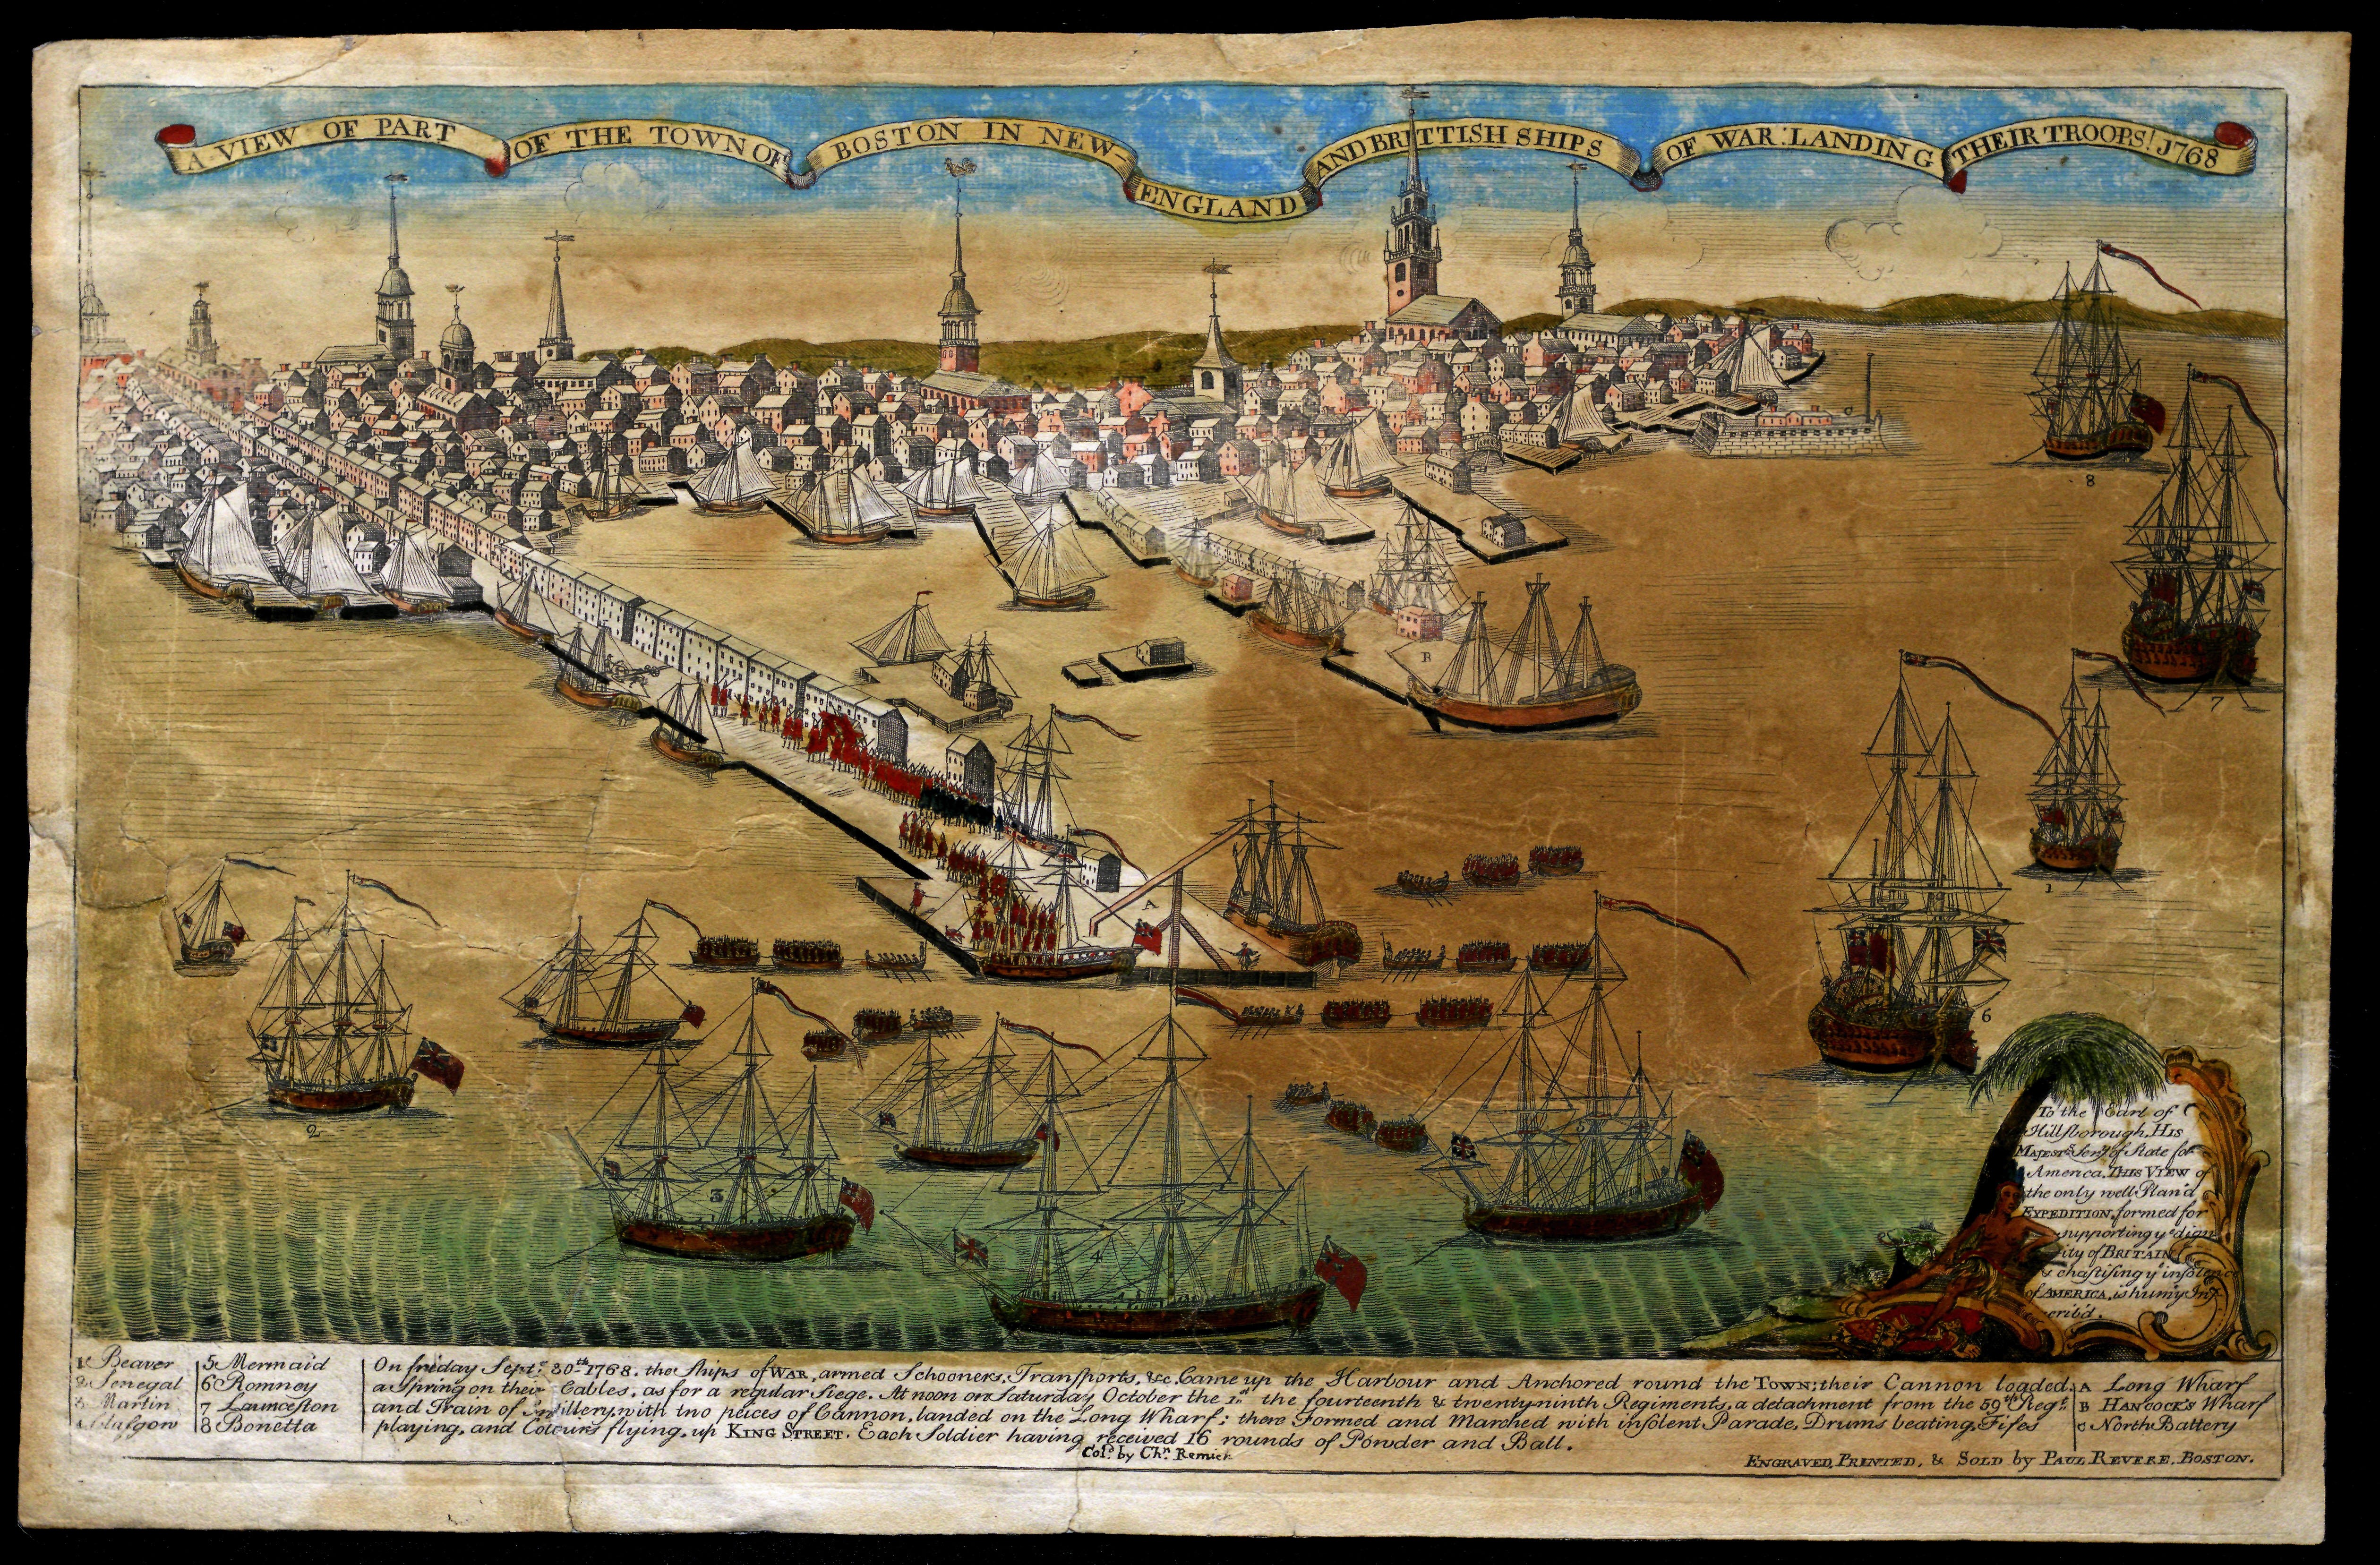 Print of British war ships landing in Boston in 1768, shortly before the Revolutionary War. This image was used to illustrate the invasion of British troops into the colonies shortly after the Boston Massacre. Engraved by Paul Revere, May 1770. (The Gilder Lehrman Institute, GLC02873)